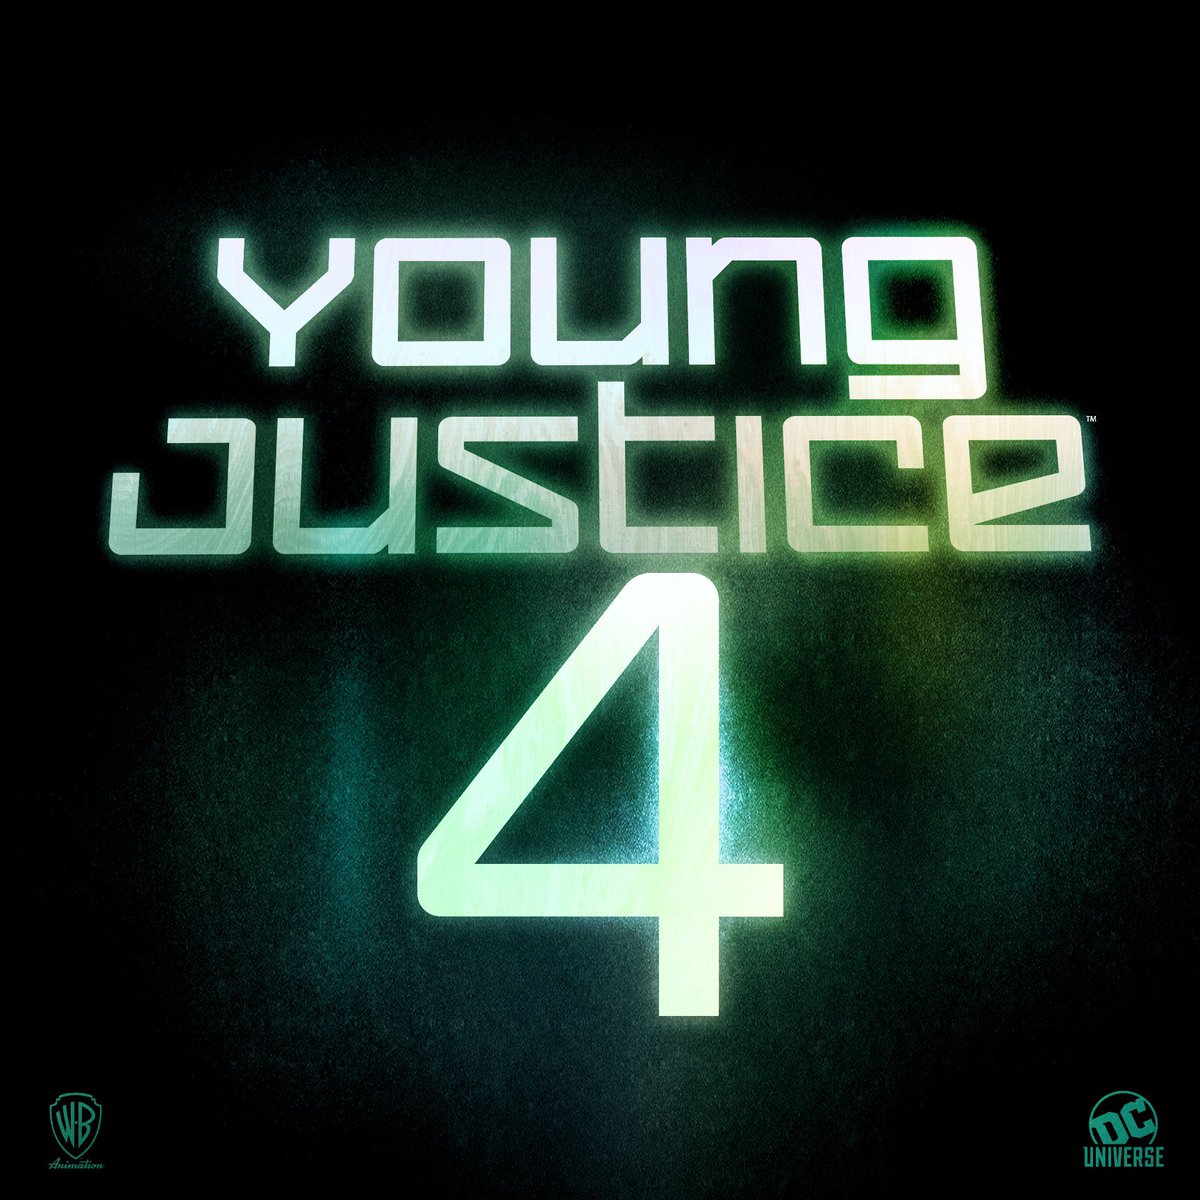 It’s official! #YoungJustice will be back for a 4th season on @TheDCUniverse !

Thanks to everyone who subscribed and supported us! Once again, we are back because of YOUR great efforts! Thank you!!!
#DCSDCC #DCUNIVERSE #SDCC2019